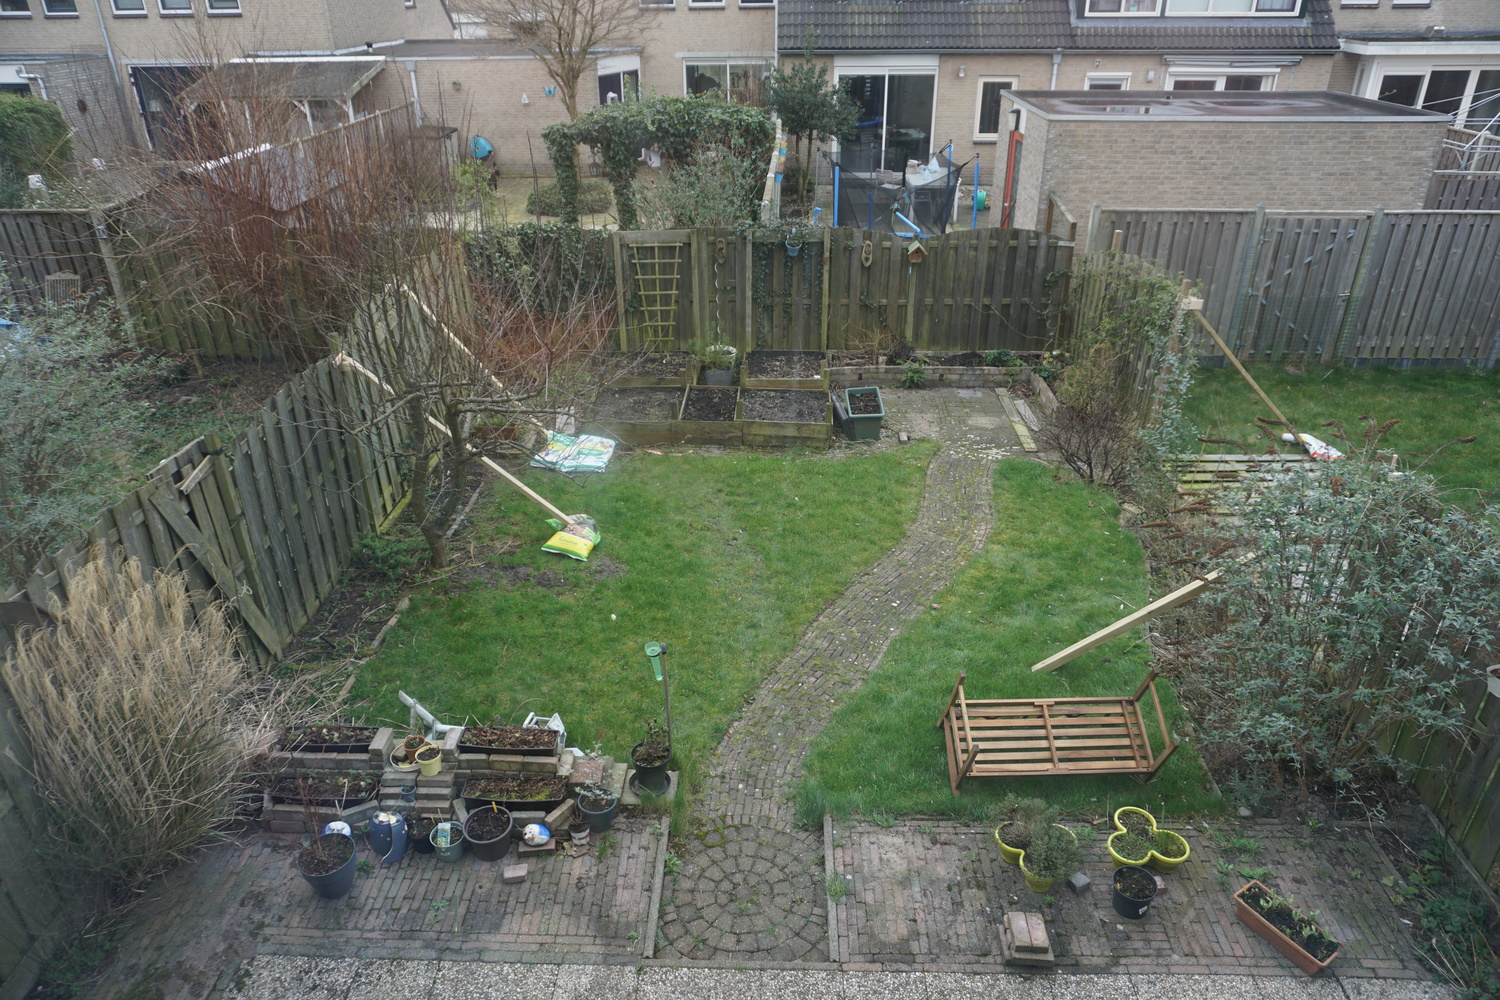 Overview of our garden